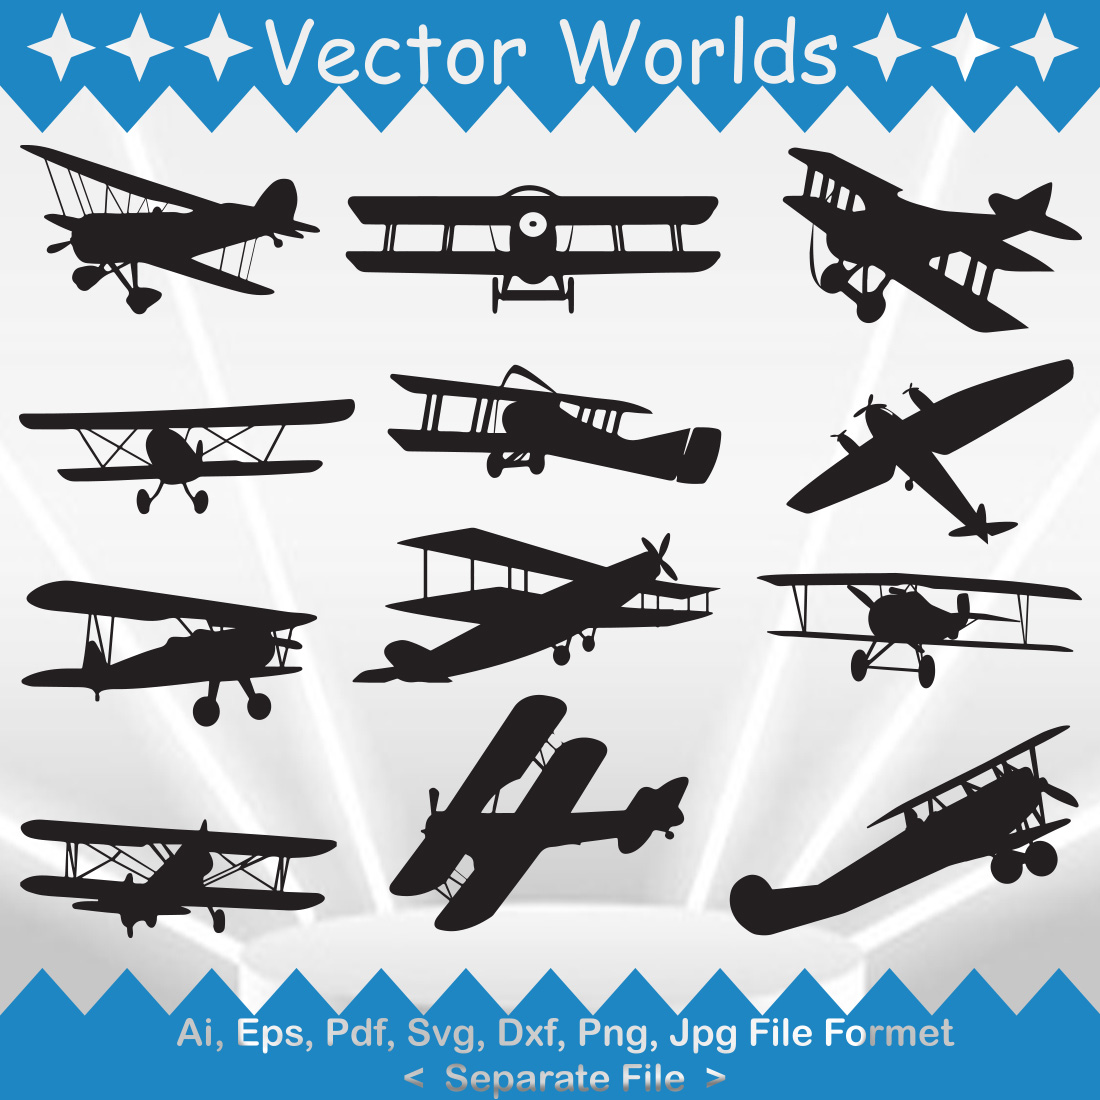 Set of vector adorable biplane silhouette images